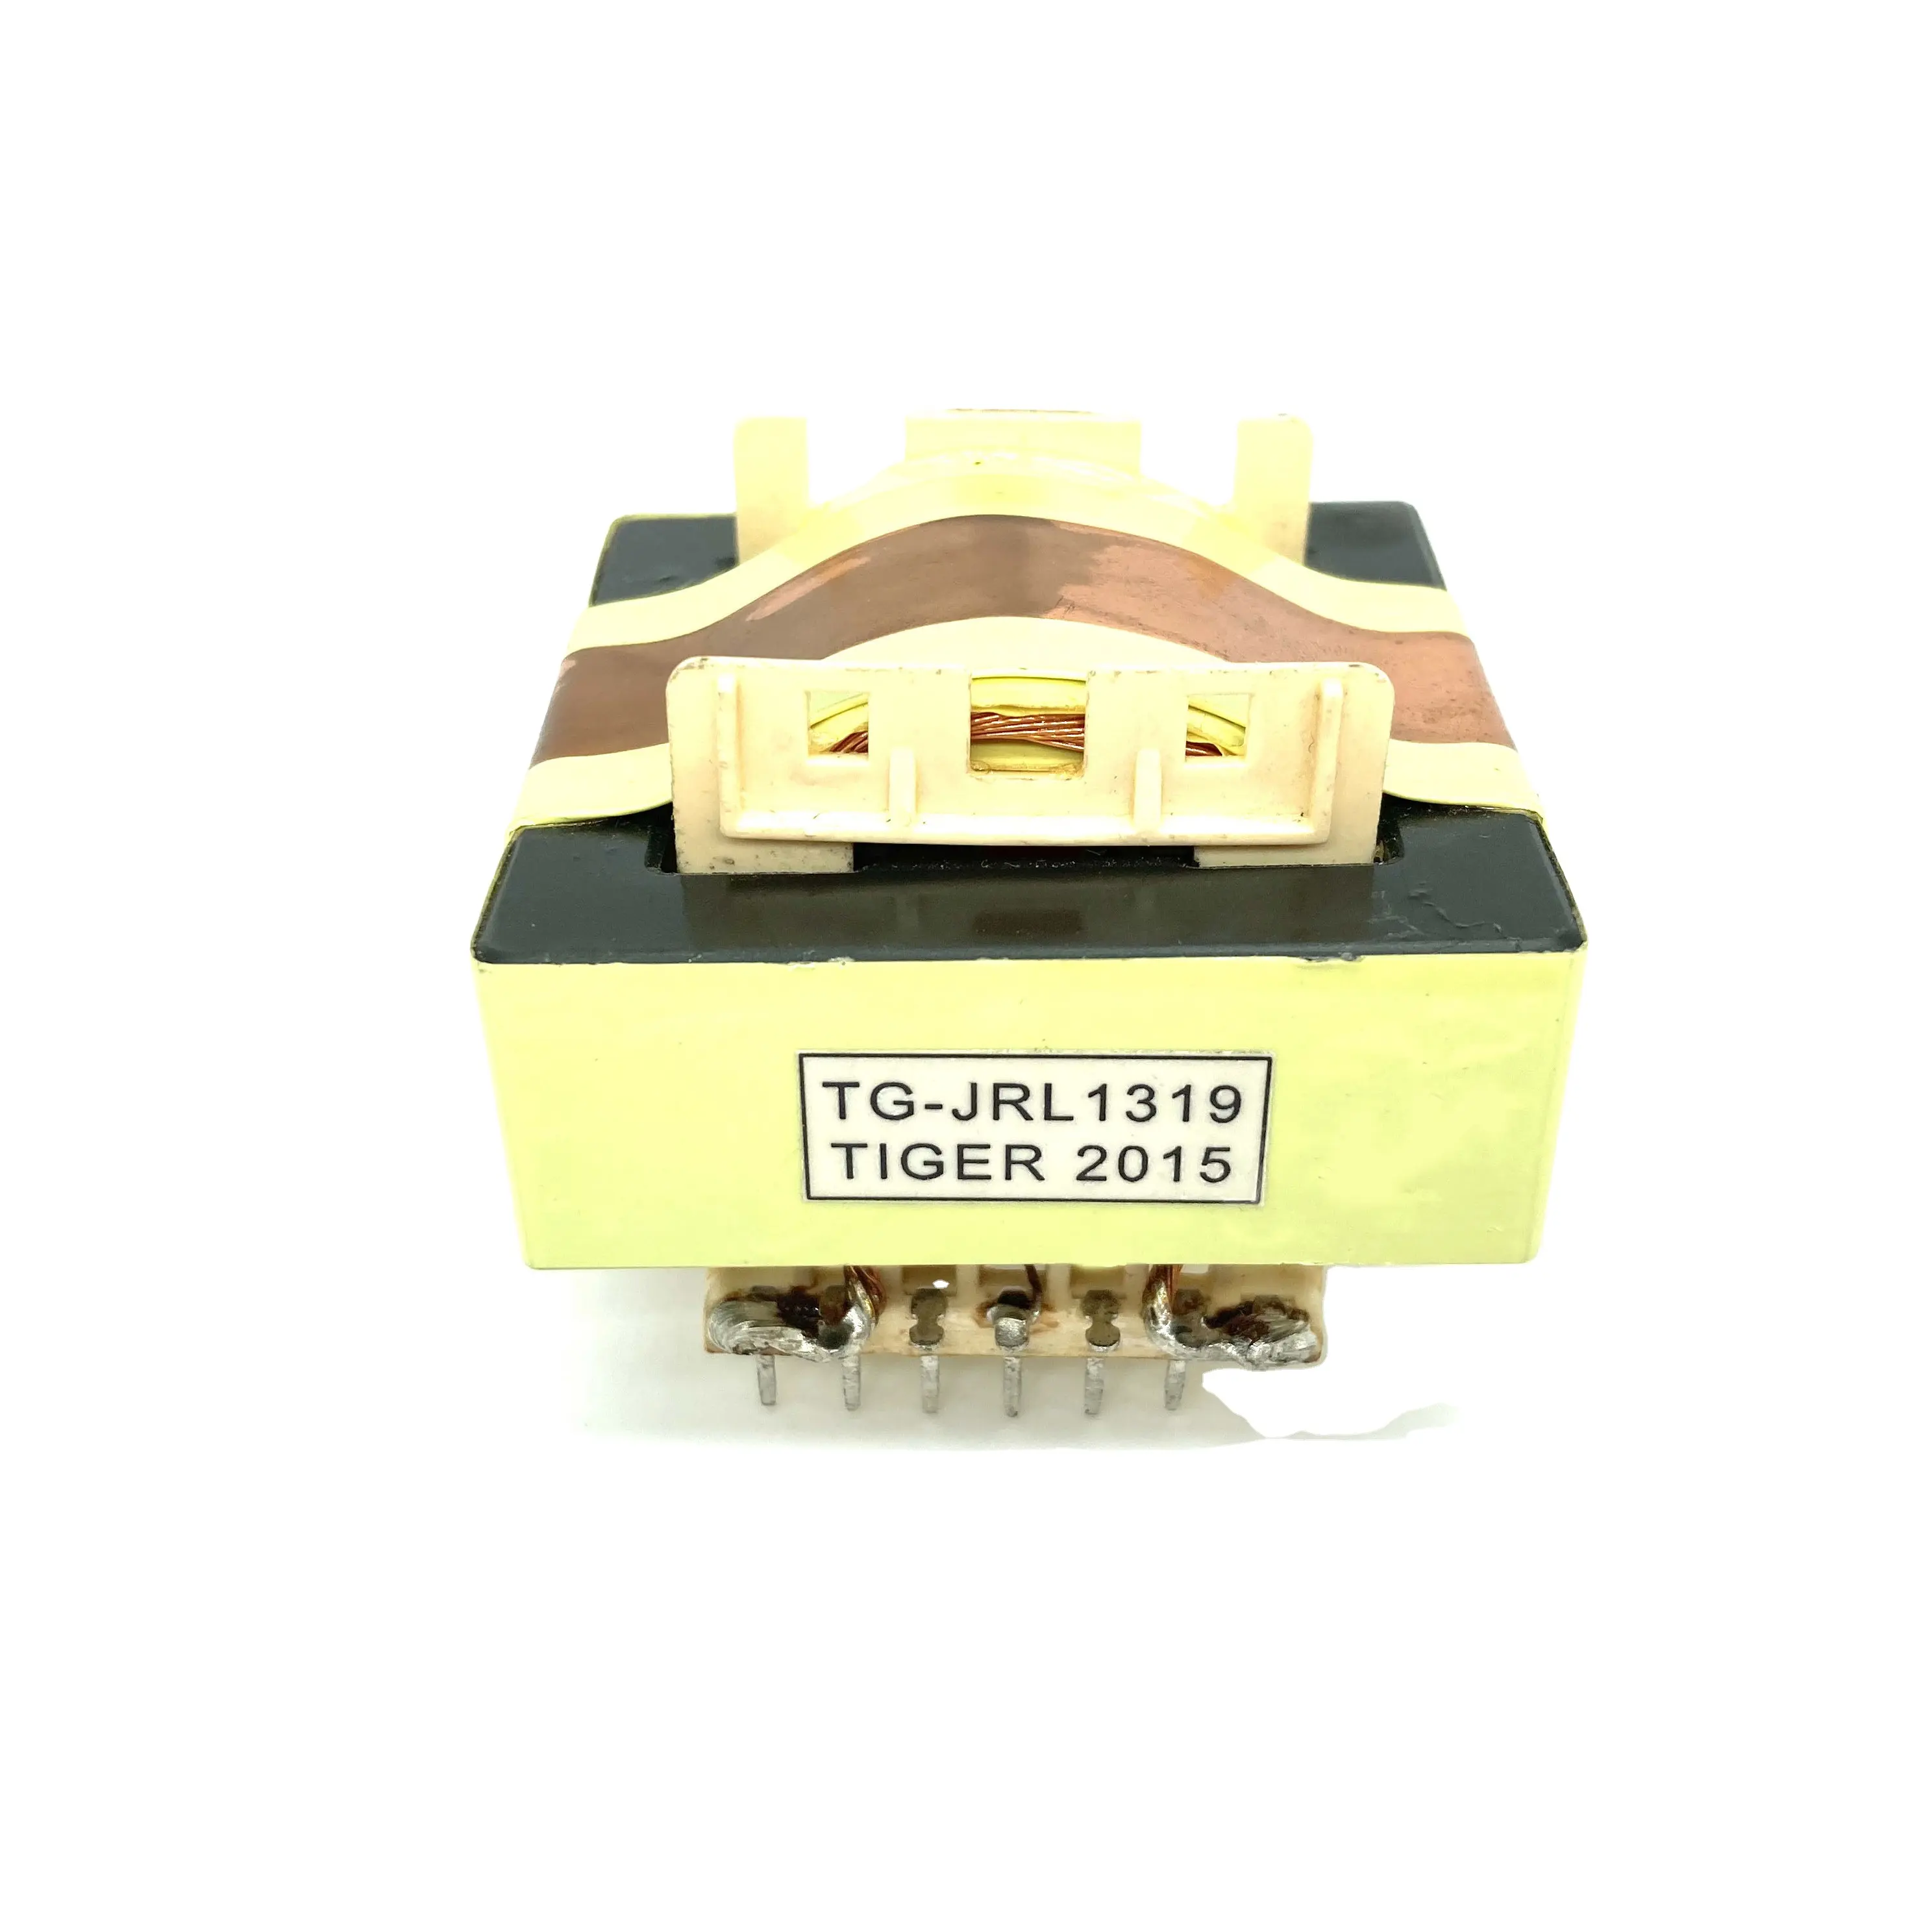 EE55 High Frequency Transformer with Outer Copper shield